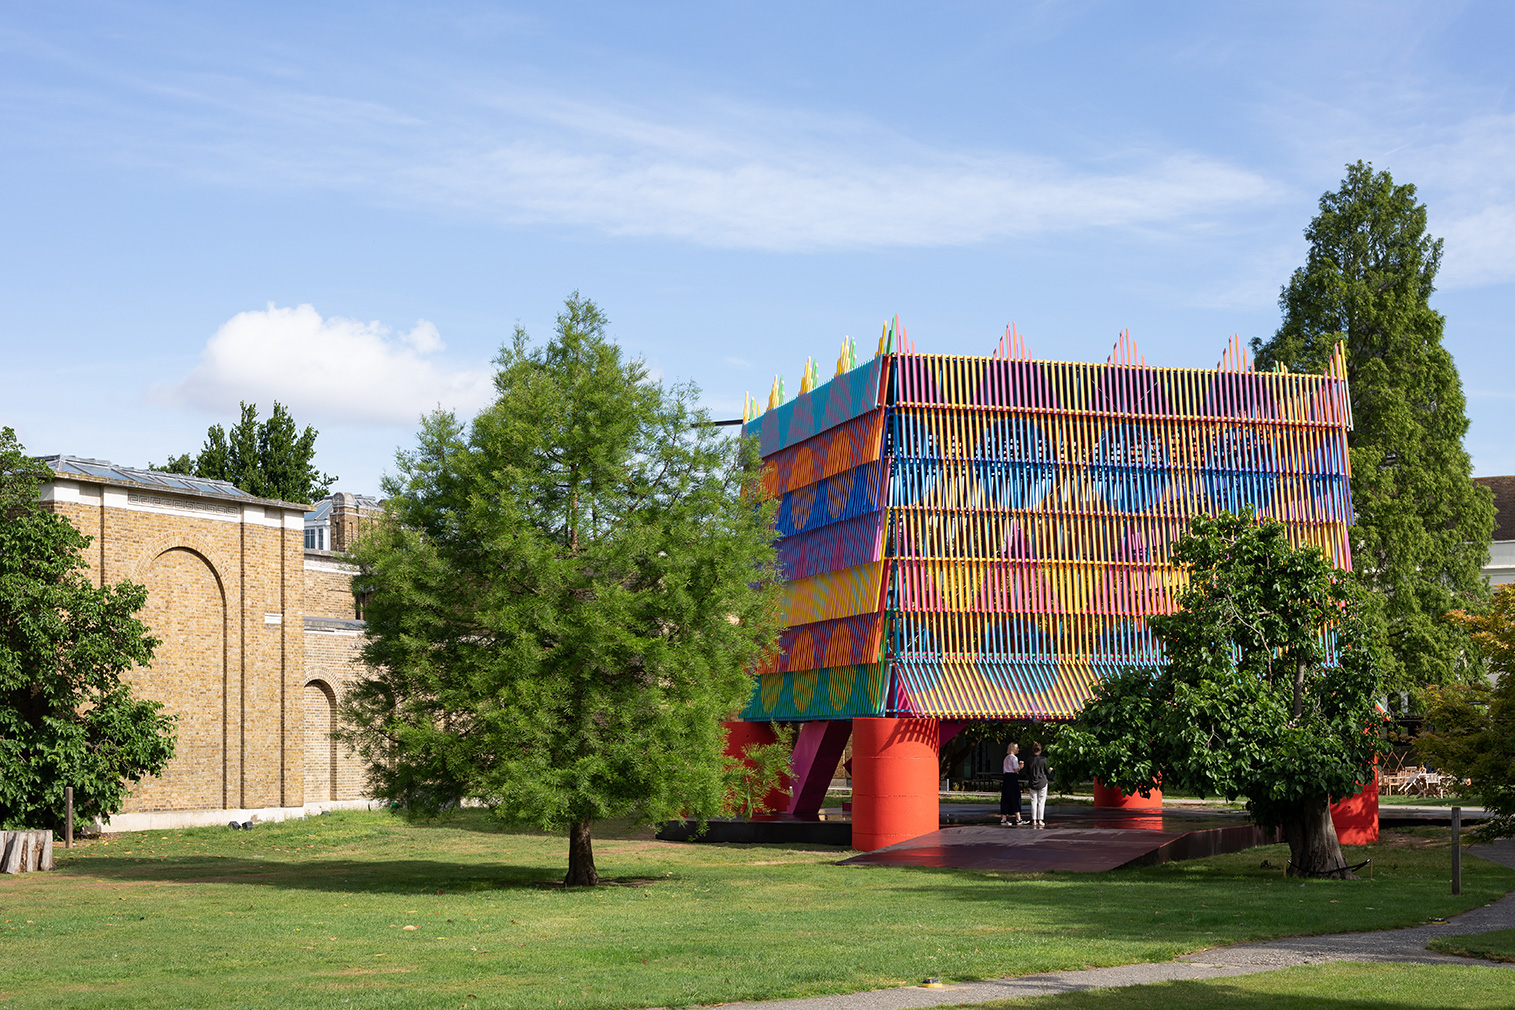 London's Dulwich Pavilion is a colourful 'party hat' in London